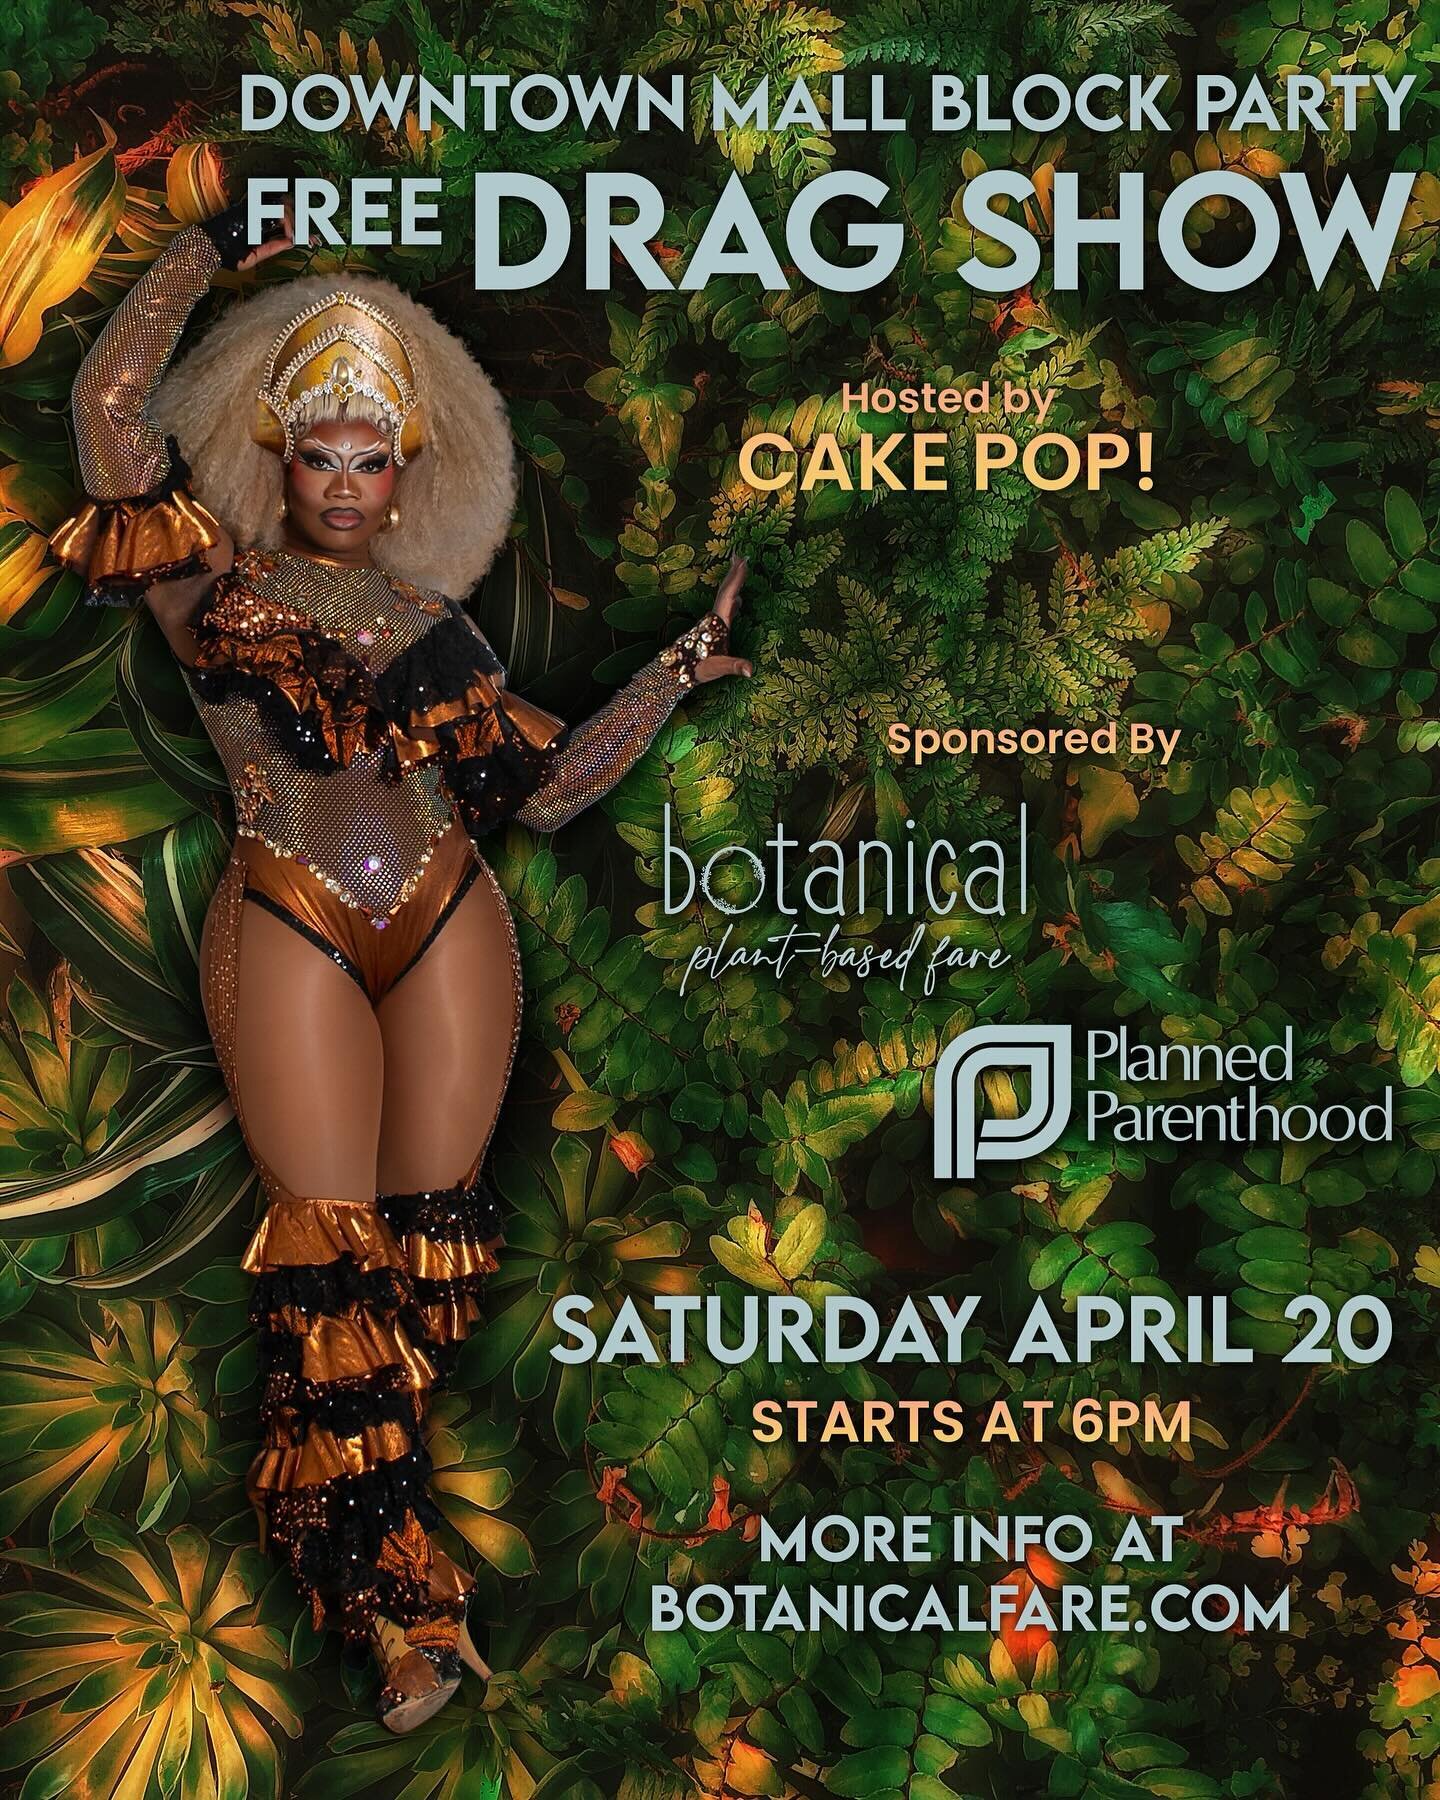 In the spirt of all of the fun and artistry that happens during @tomtomfoundation fest, we thought we would join in with a FREE drag show during the Saturday downtown mall block party 🎉 

this show will be held outside on our patio, so seating will 